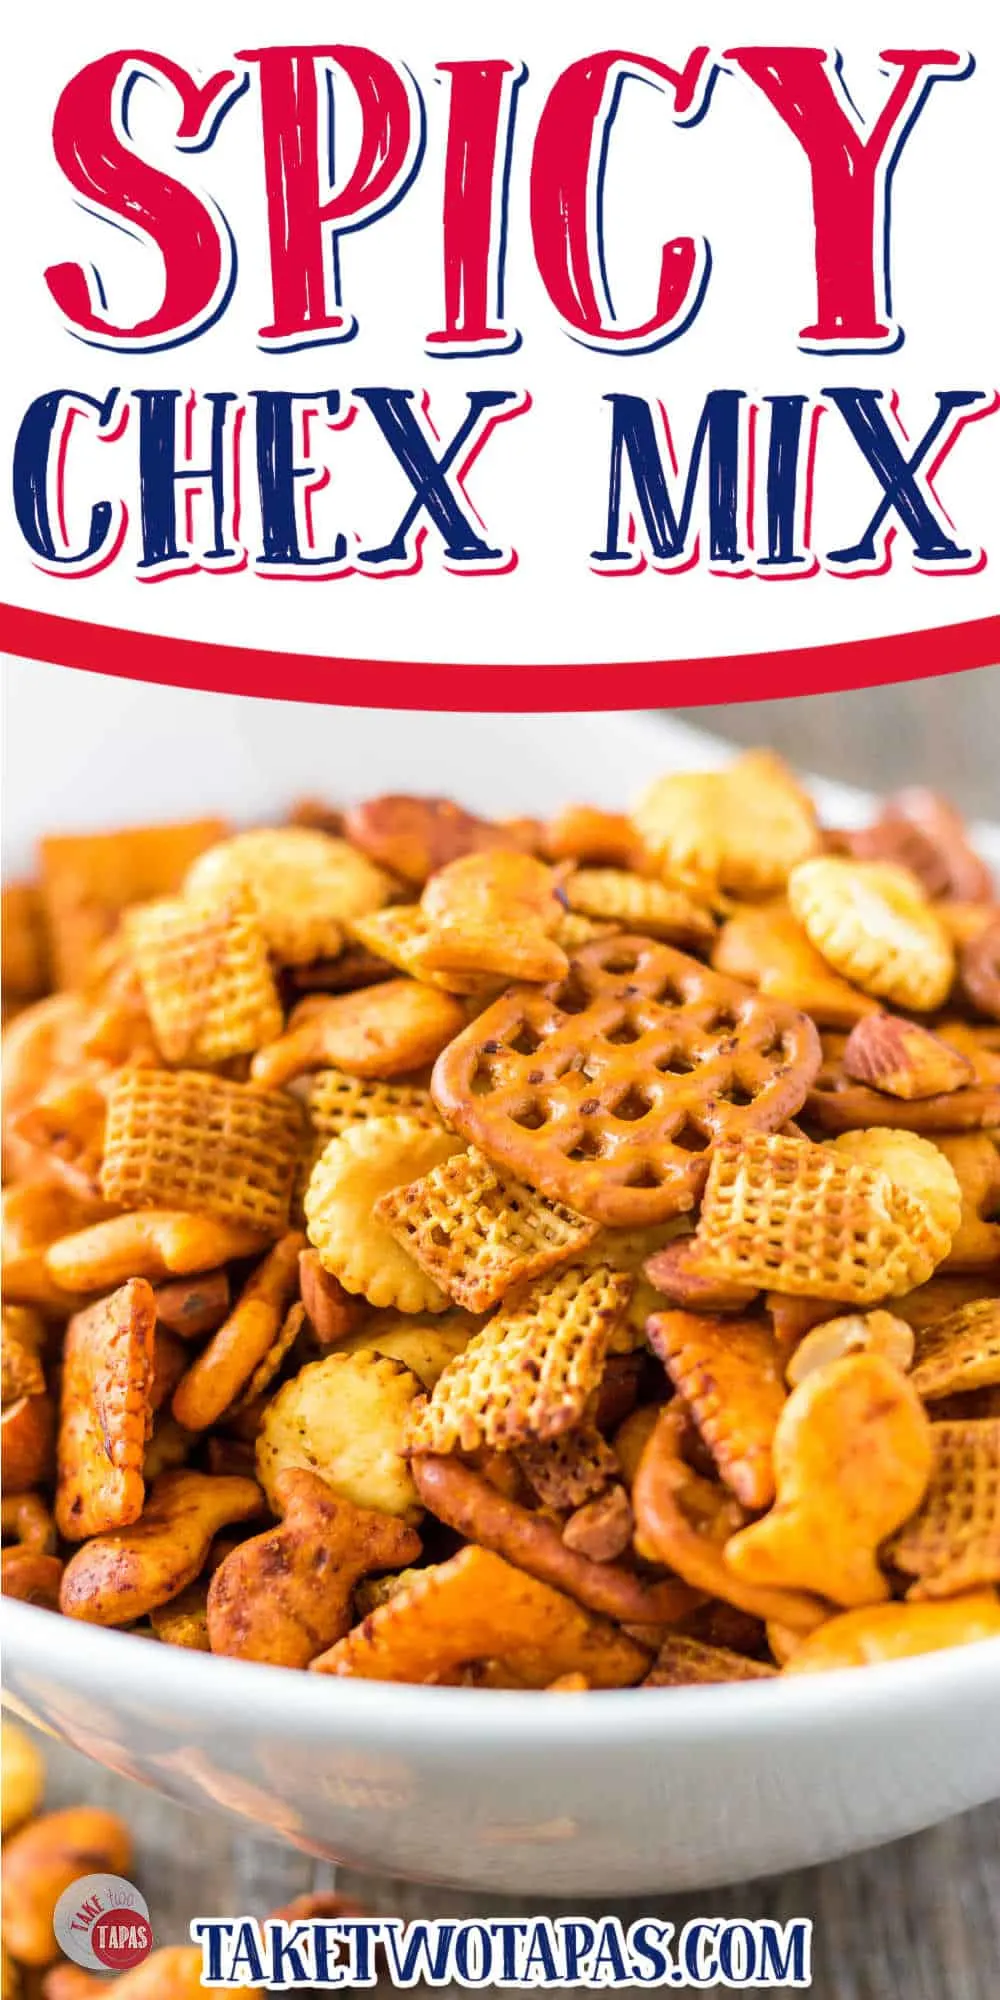 bowl of chex mix with text "spicy chex mix" makes great travel foods